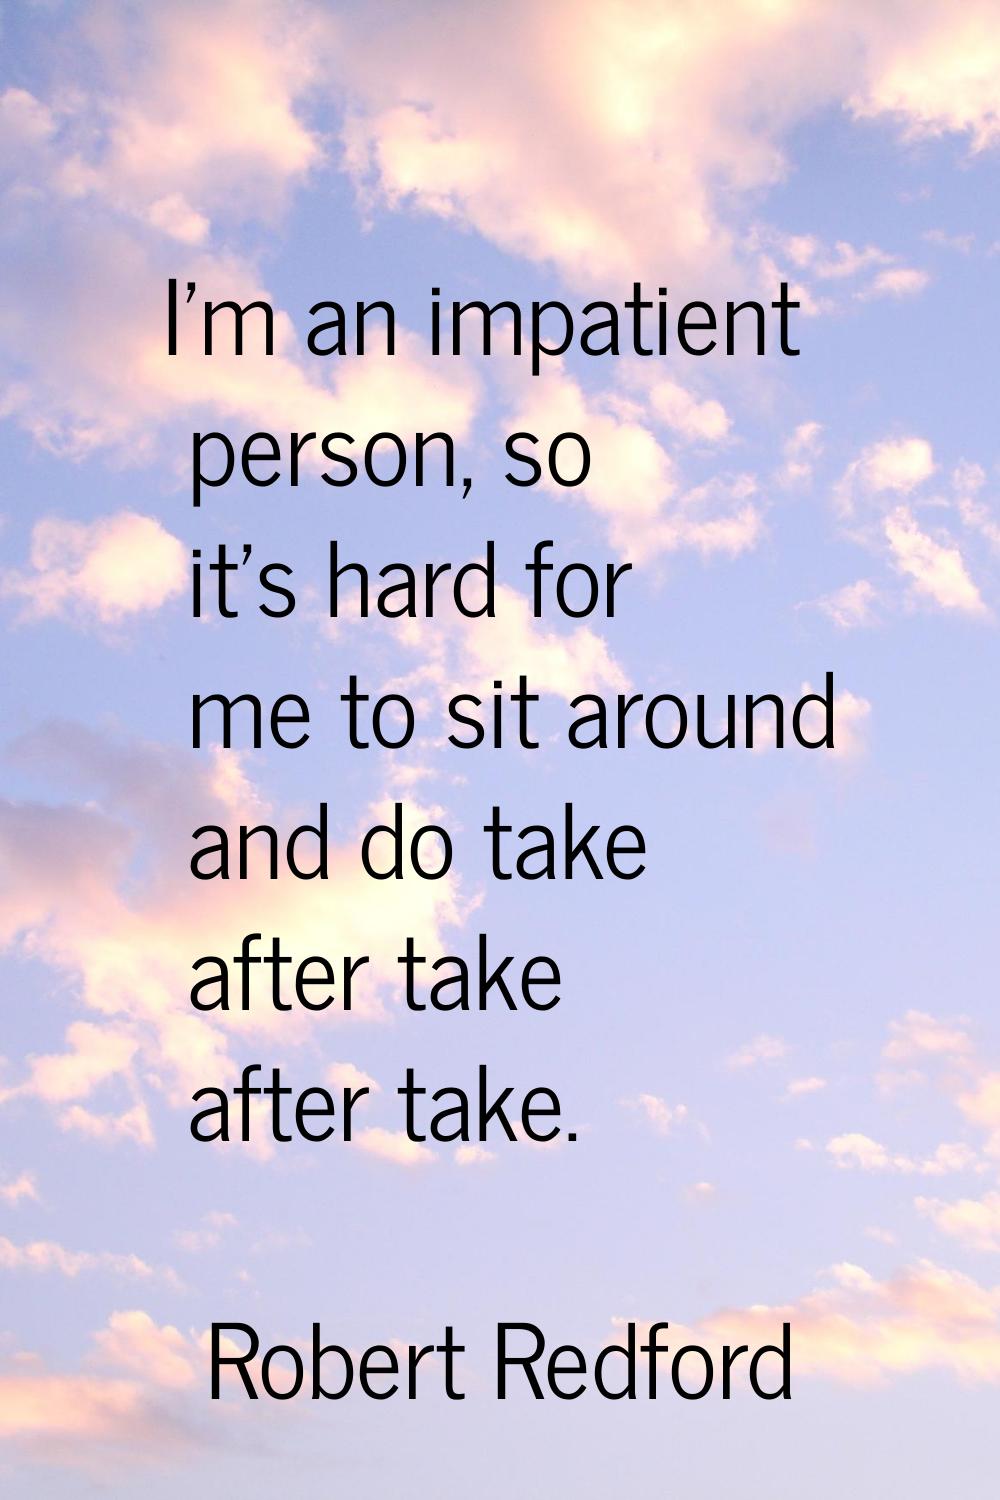 I'm an impatient person, so it's hard for me to sit around and do take after take after take.